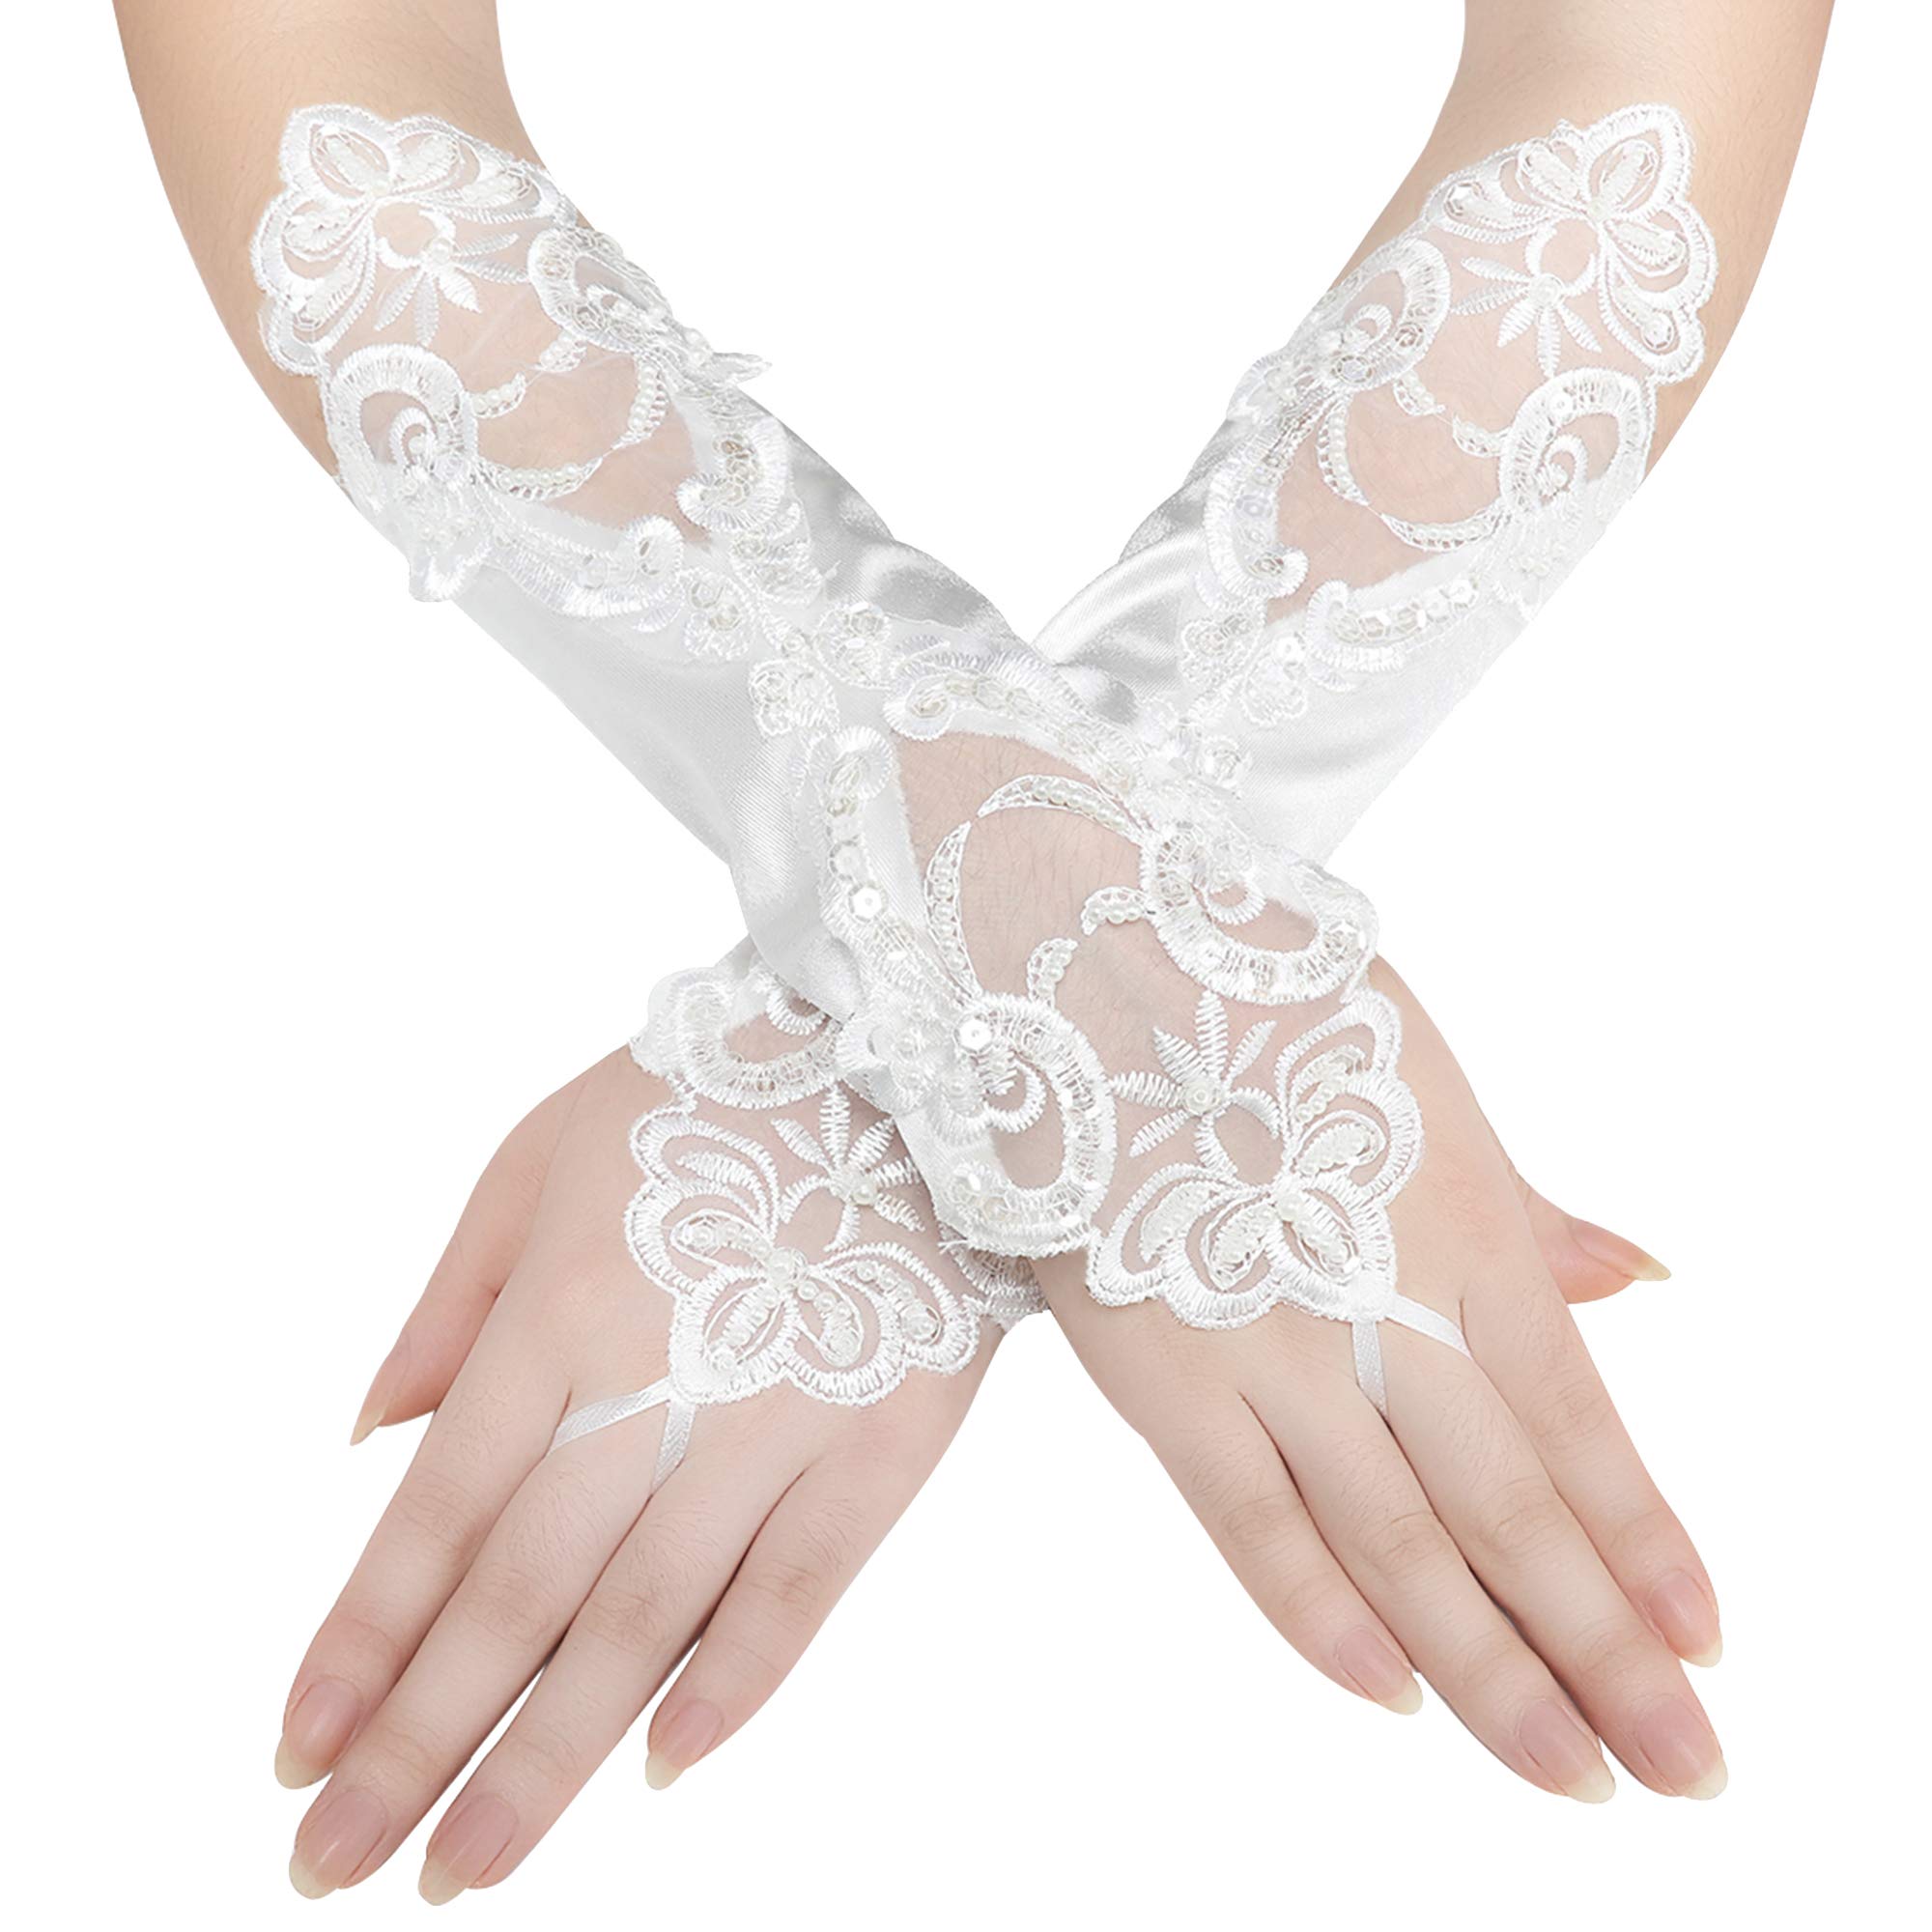 BABEYOND Short Opera Party 20s Satin Gloves Tea Party Wedding Lace Gloves